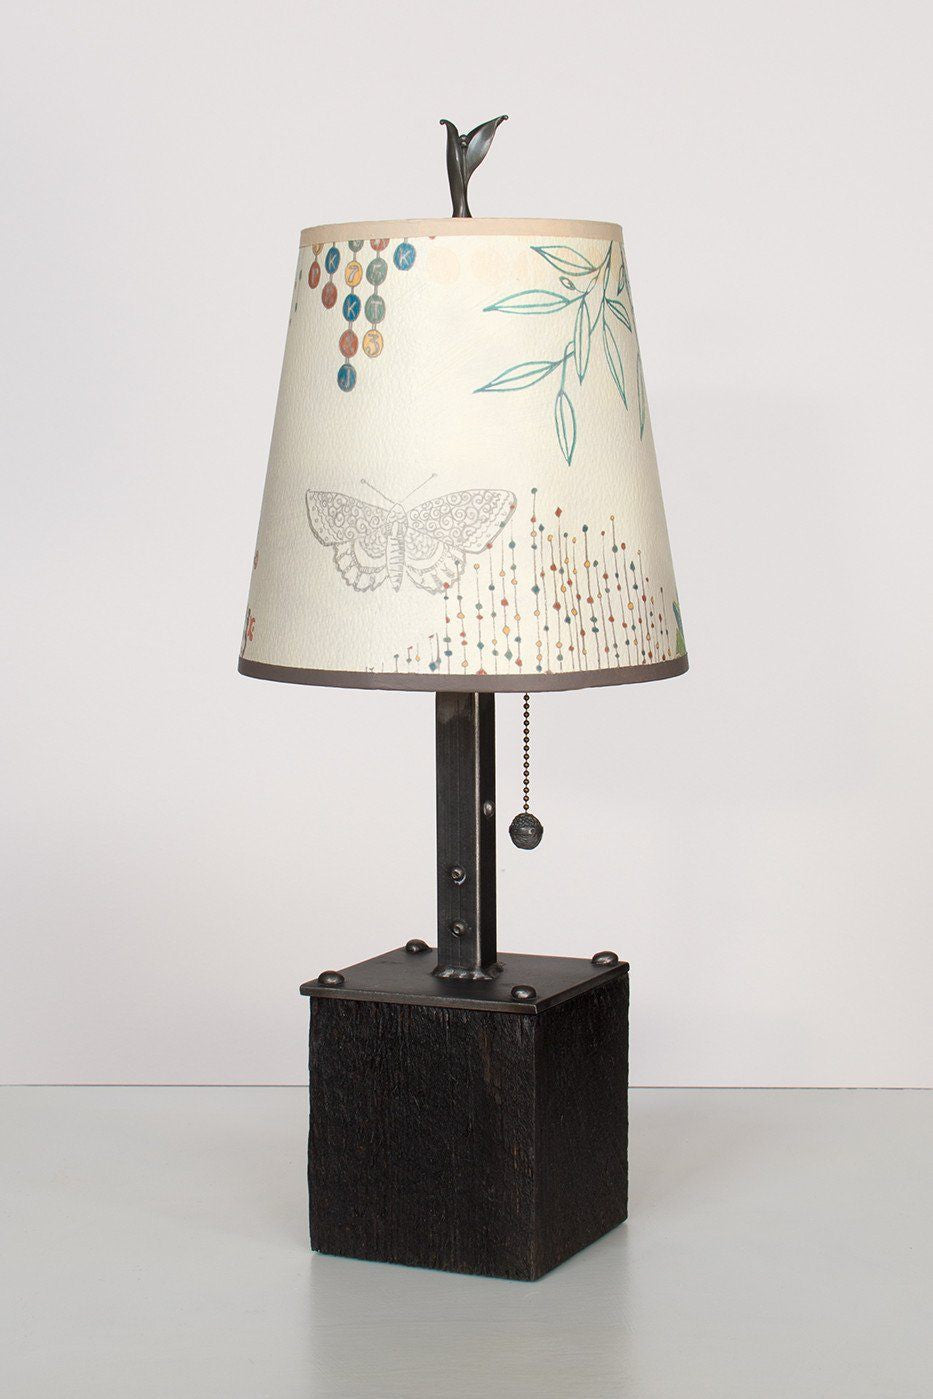 Steel Table Lamp on Reclaimed Wood with Small Drum Shade in Ecru Journey